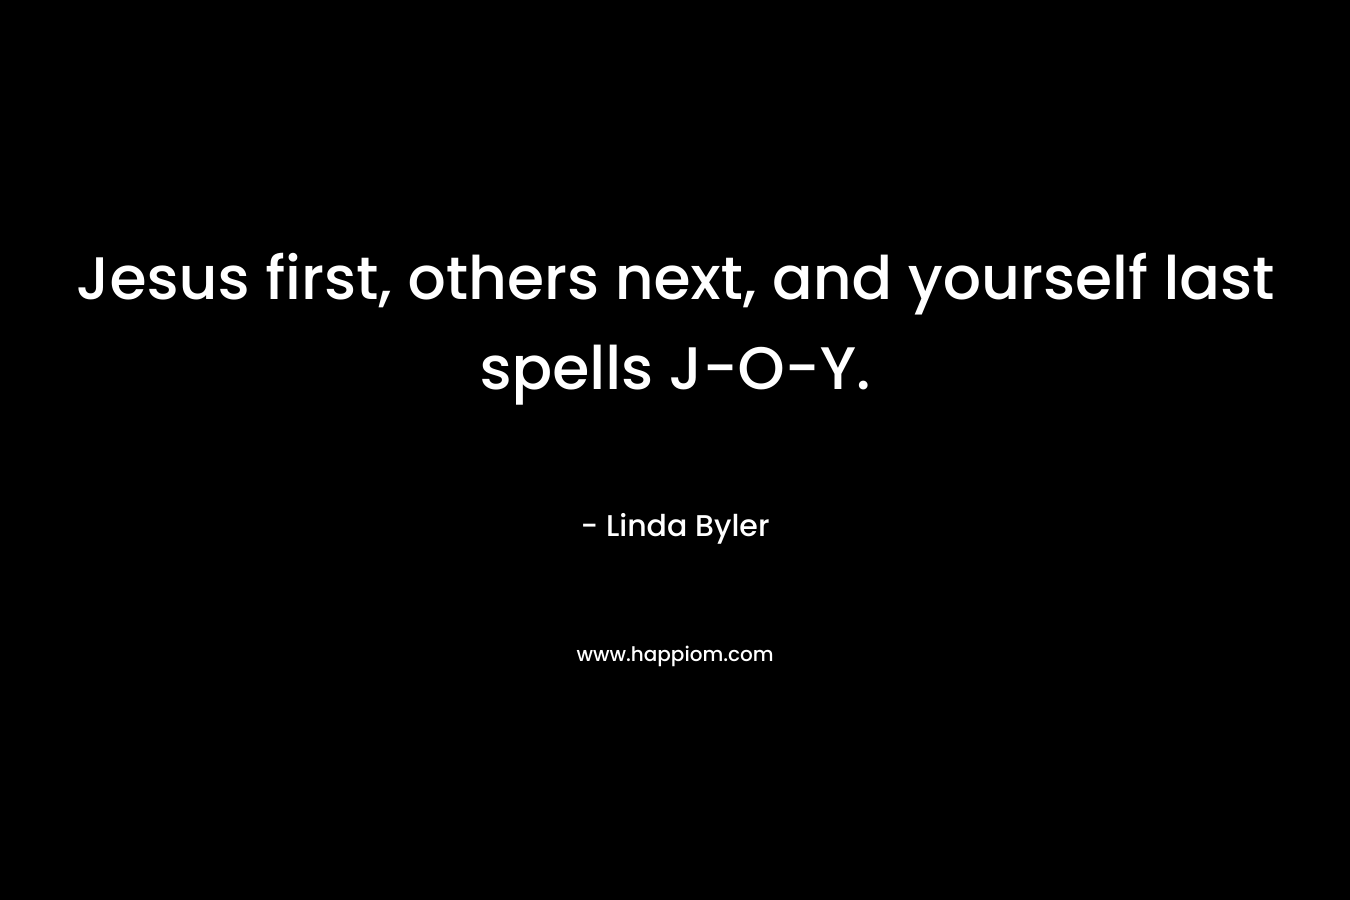 Jesus first, others next, and yourself last spells J-O-Y. – Linda Byler